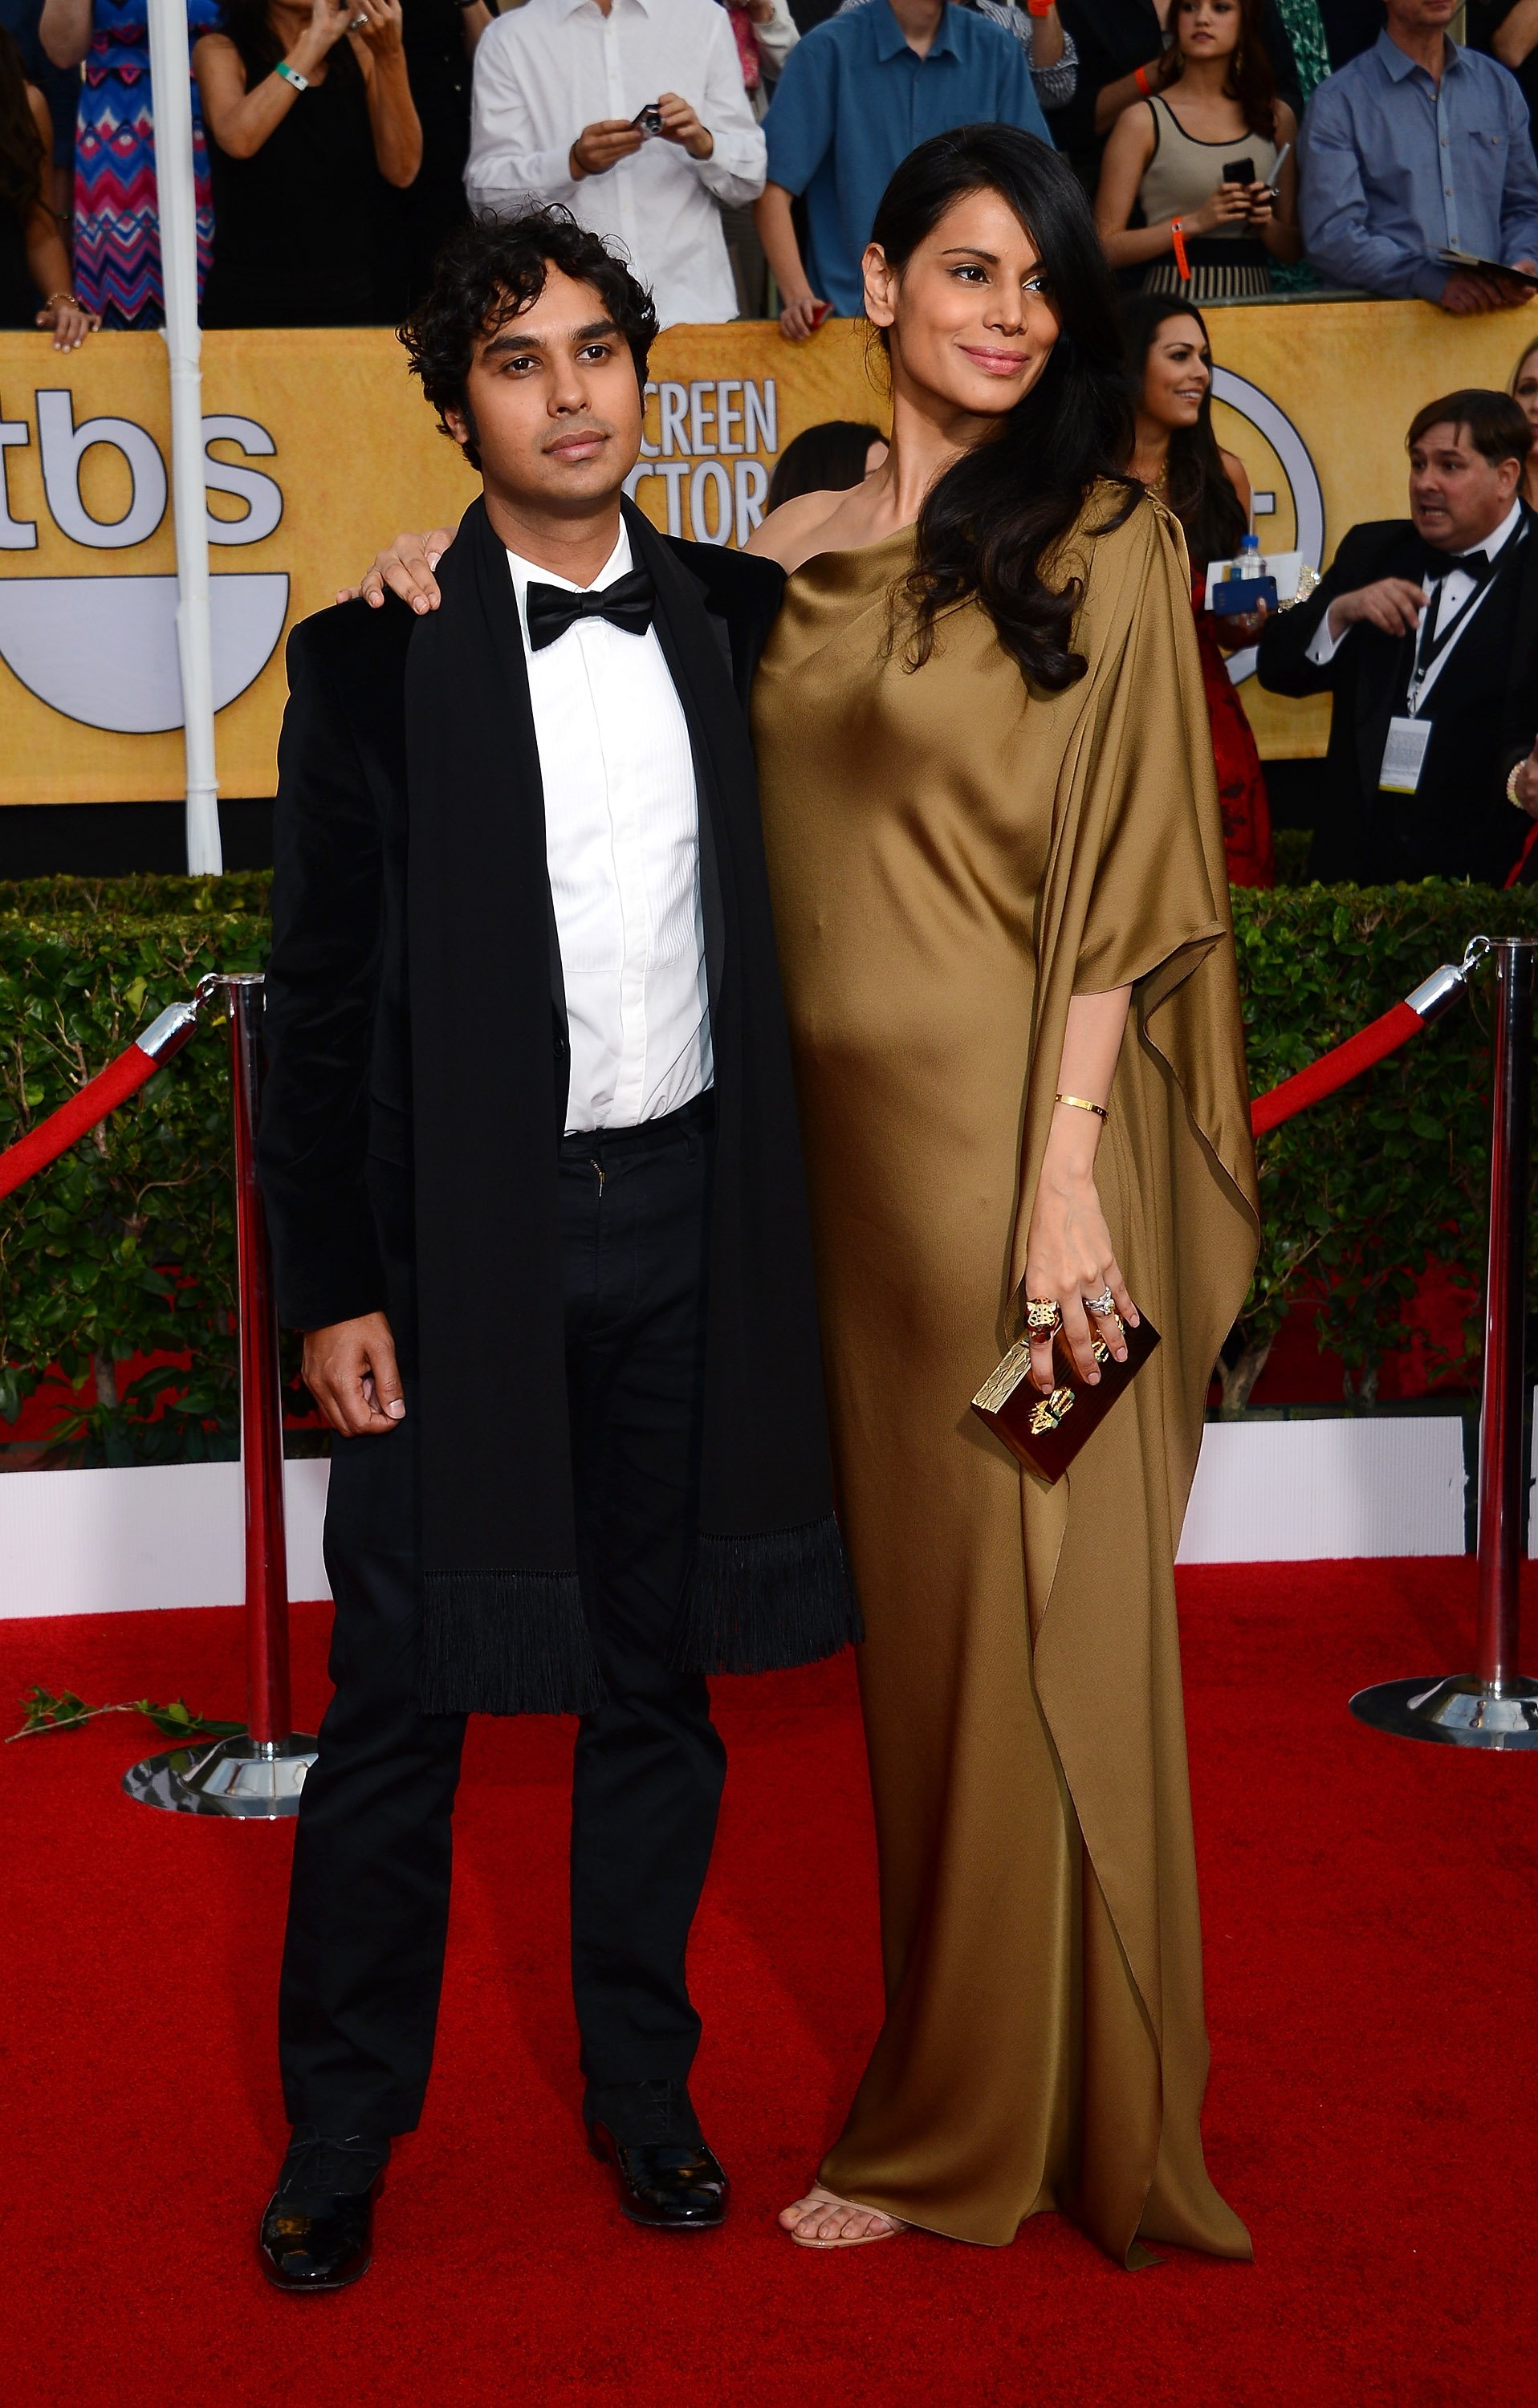 Kunal Nayyar and his wife Neha Kapur at the 20th Annual Screen Actors Guild Awards in Los Angeles | Source: Getty Images